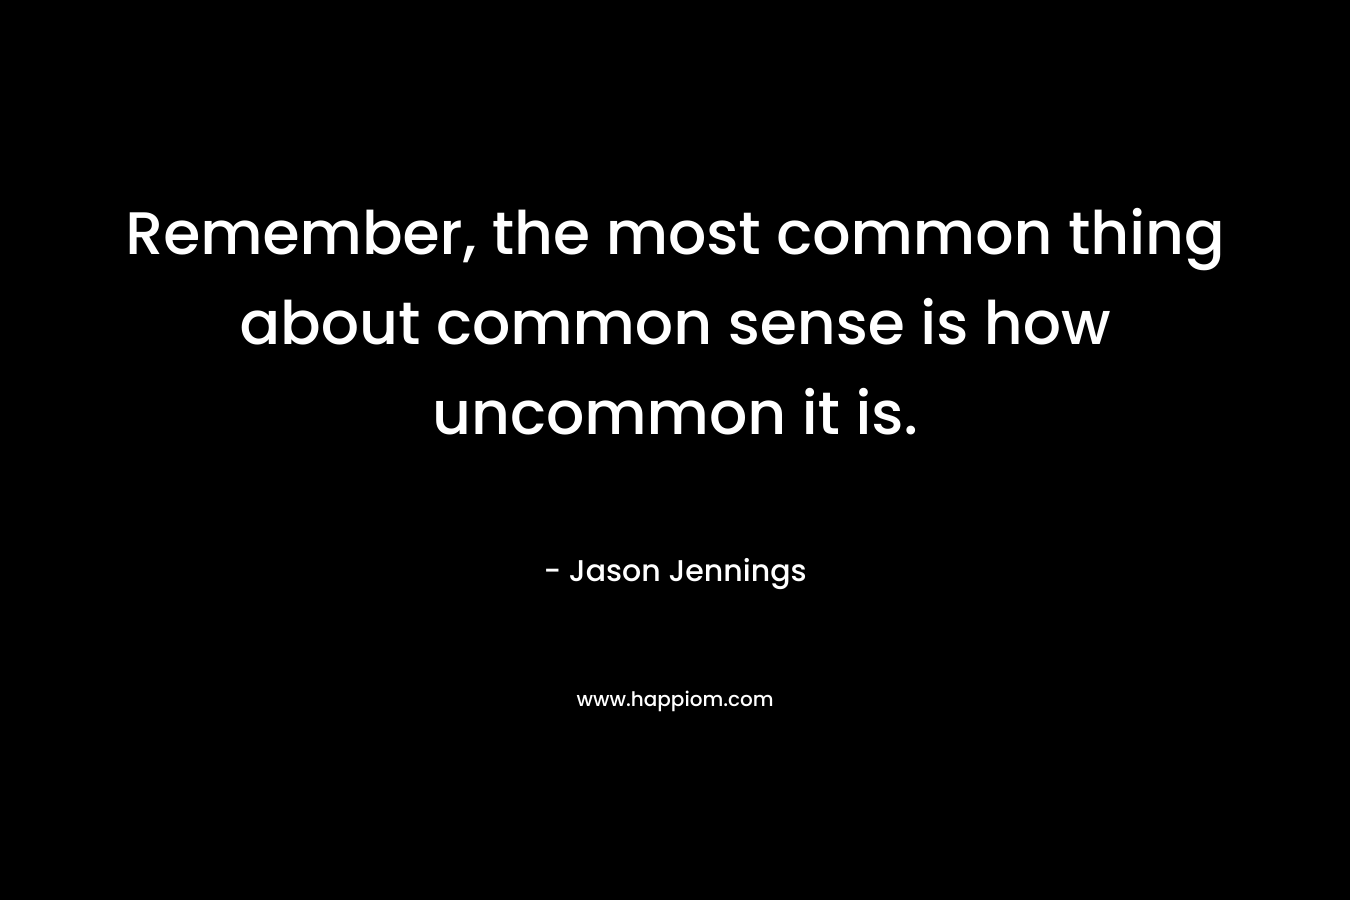 Remember, the most common thing about common sense is how uncommon it is.